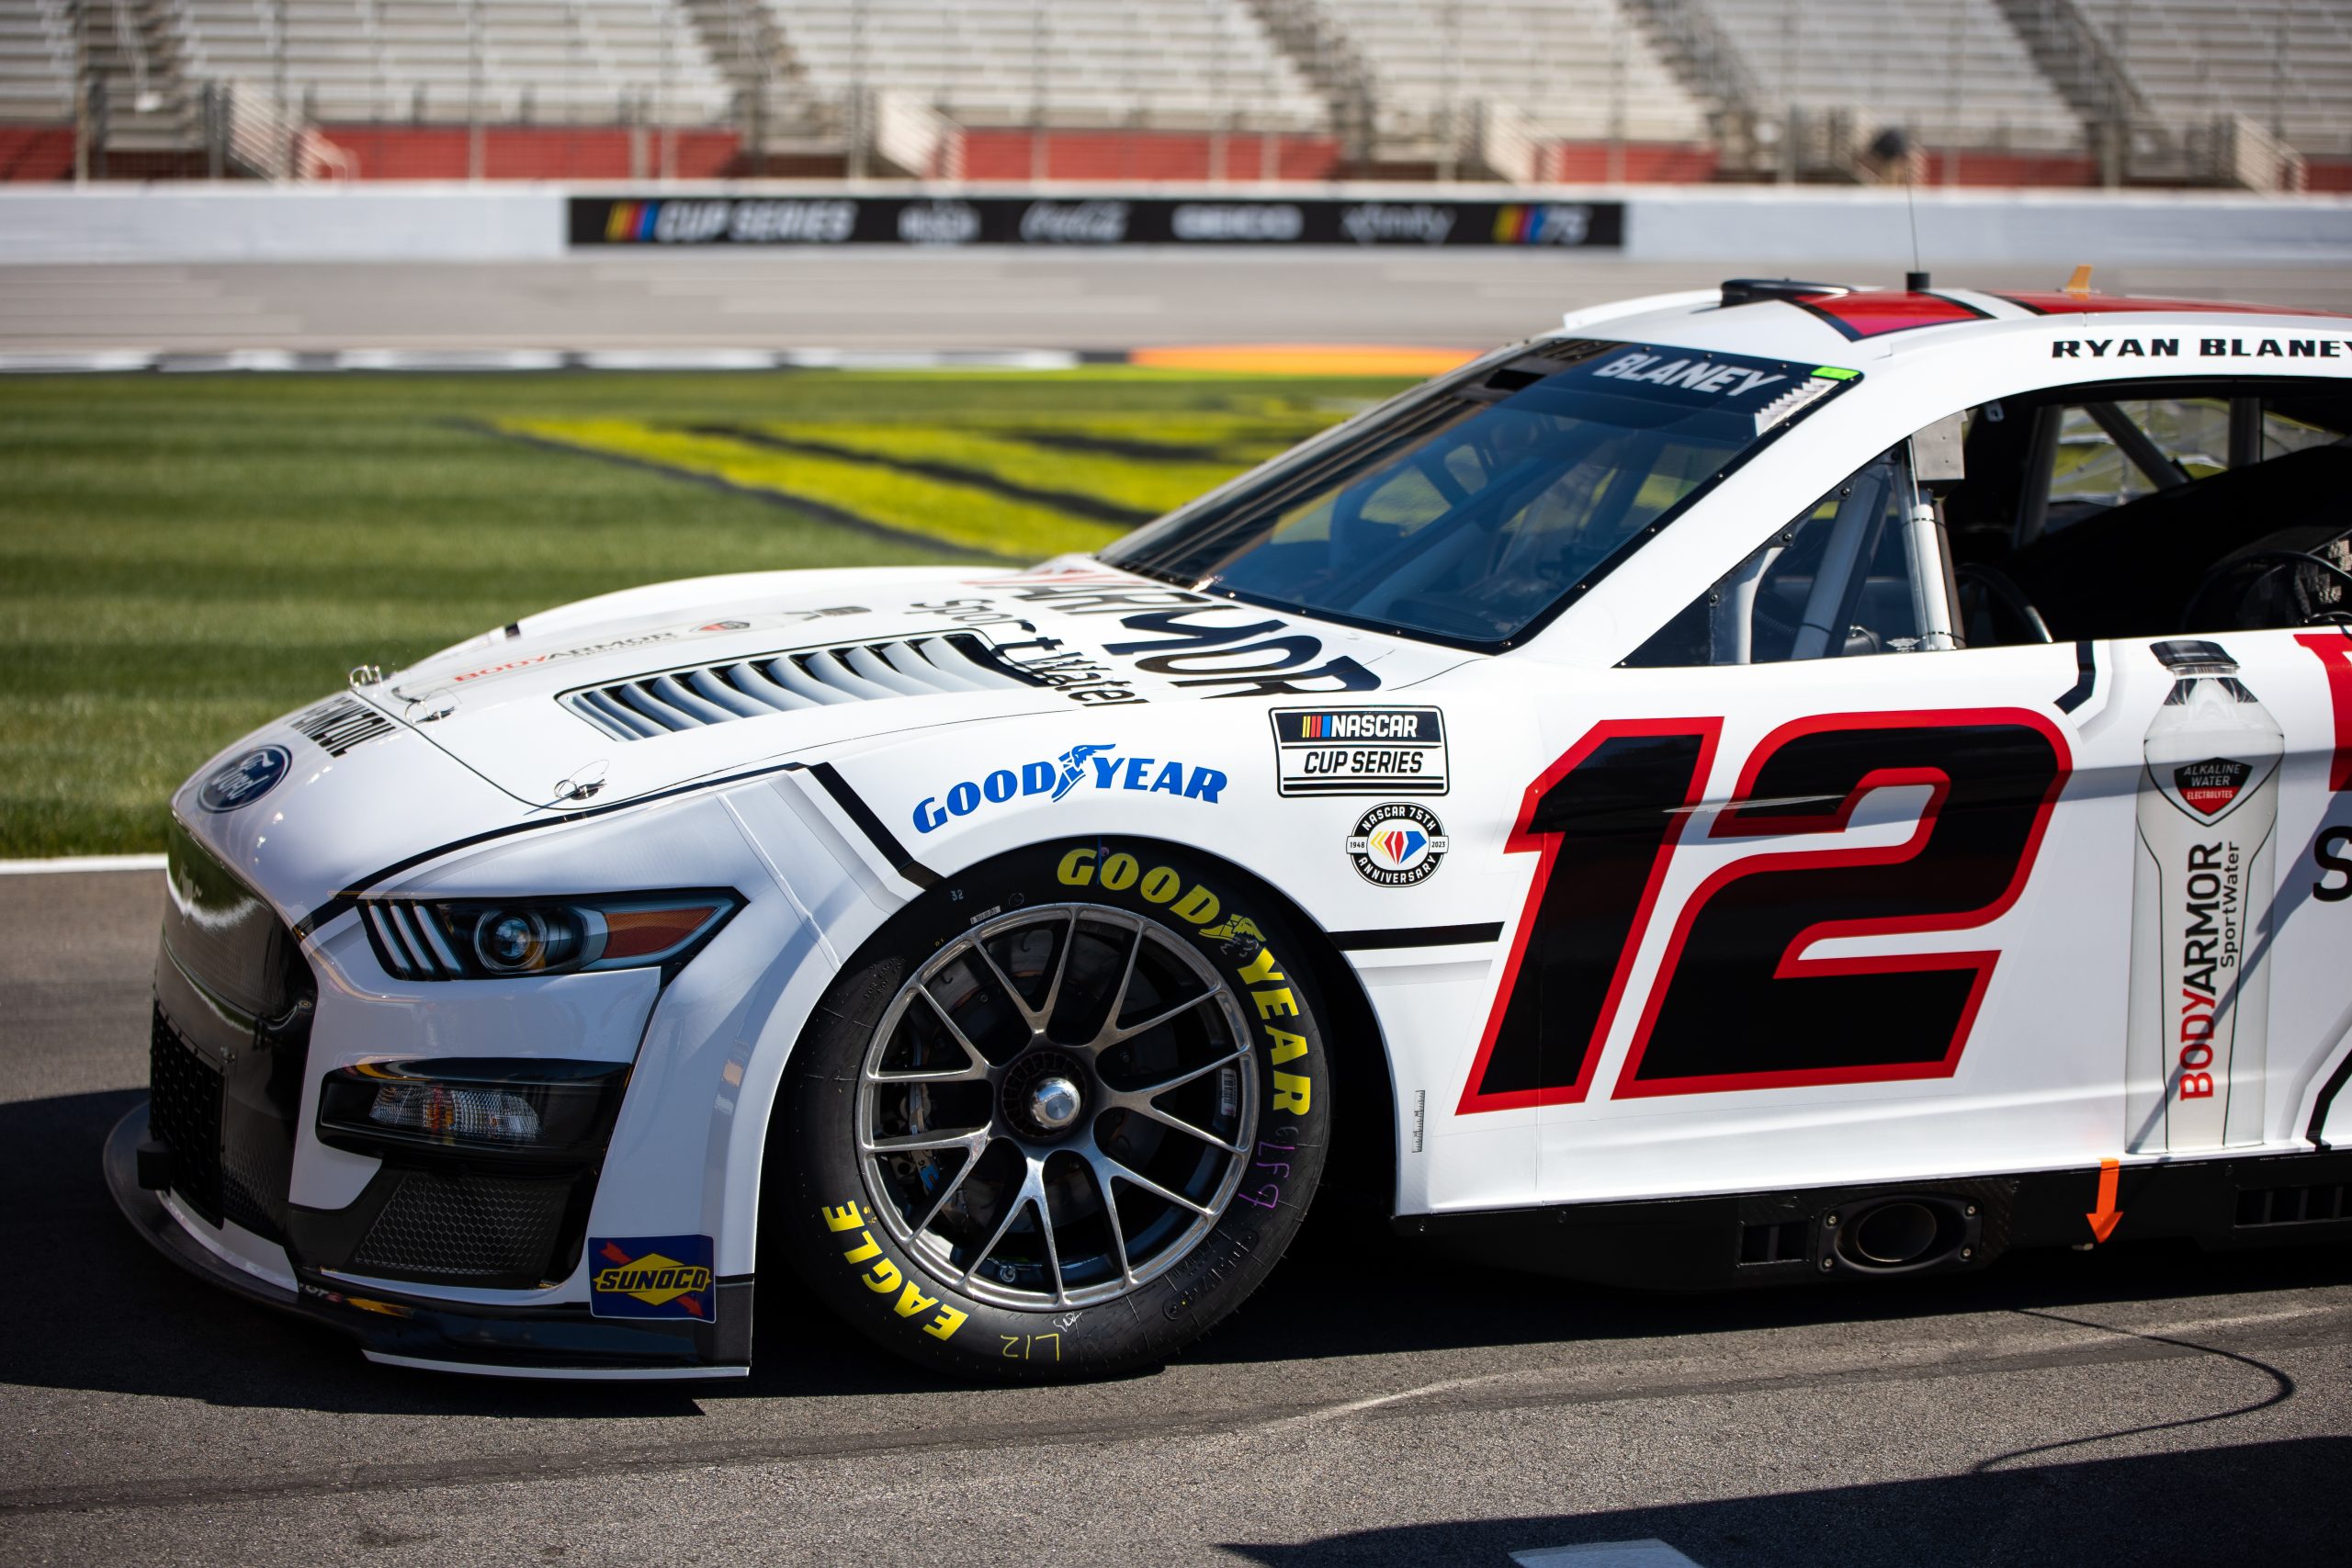 Blaney's No. 12 ride sports some new colors. (Photo: Riley Thompson | The Podium Finish)